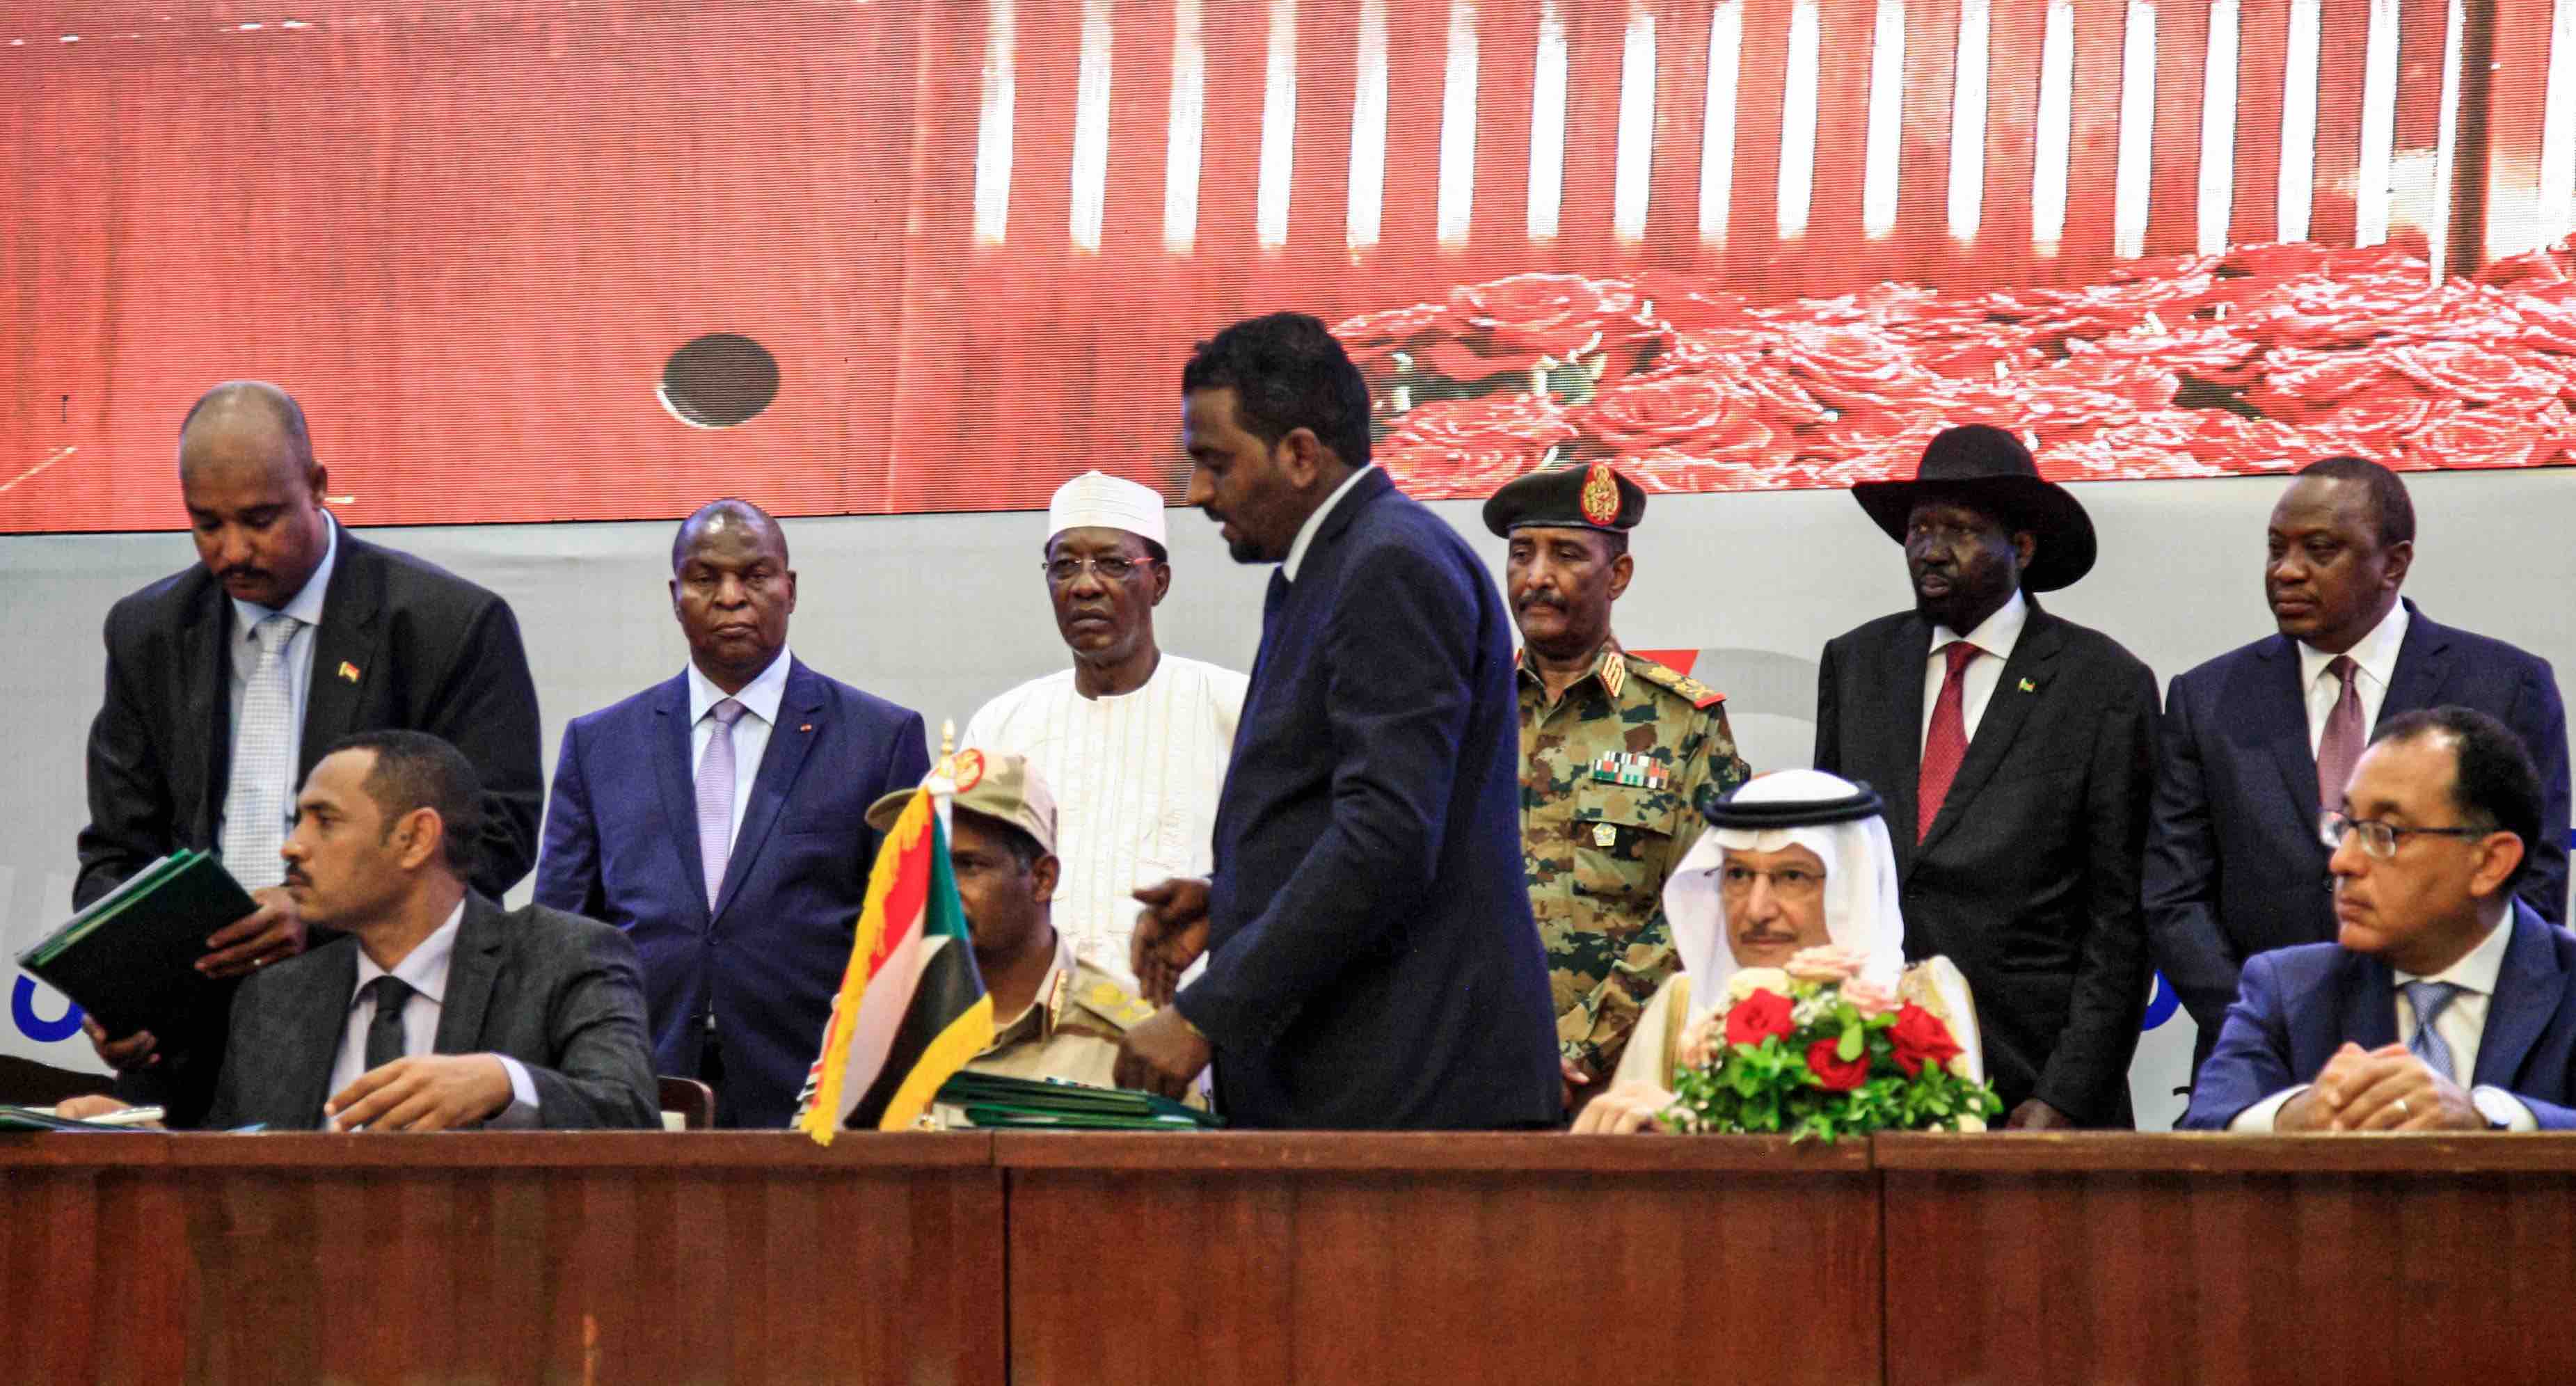 The sovereign council includes two women, including a member of Sudan's Christian minority